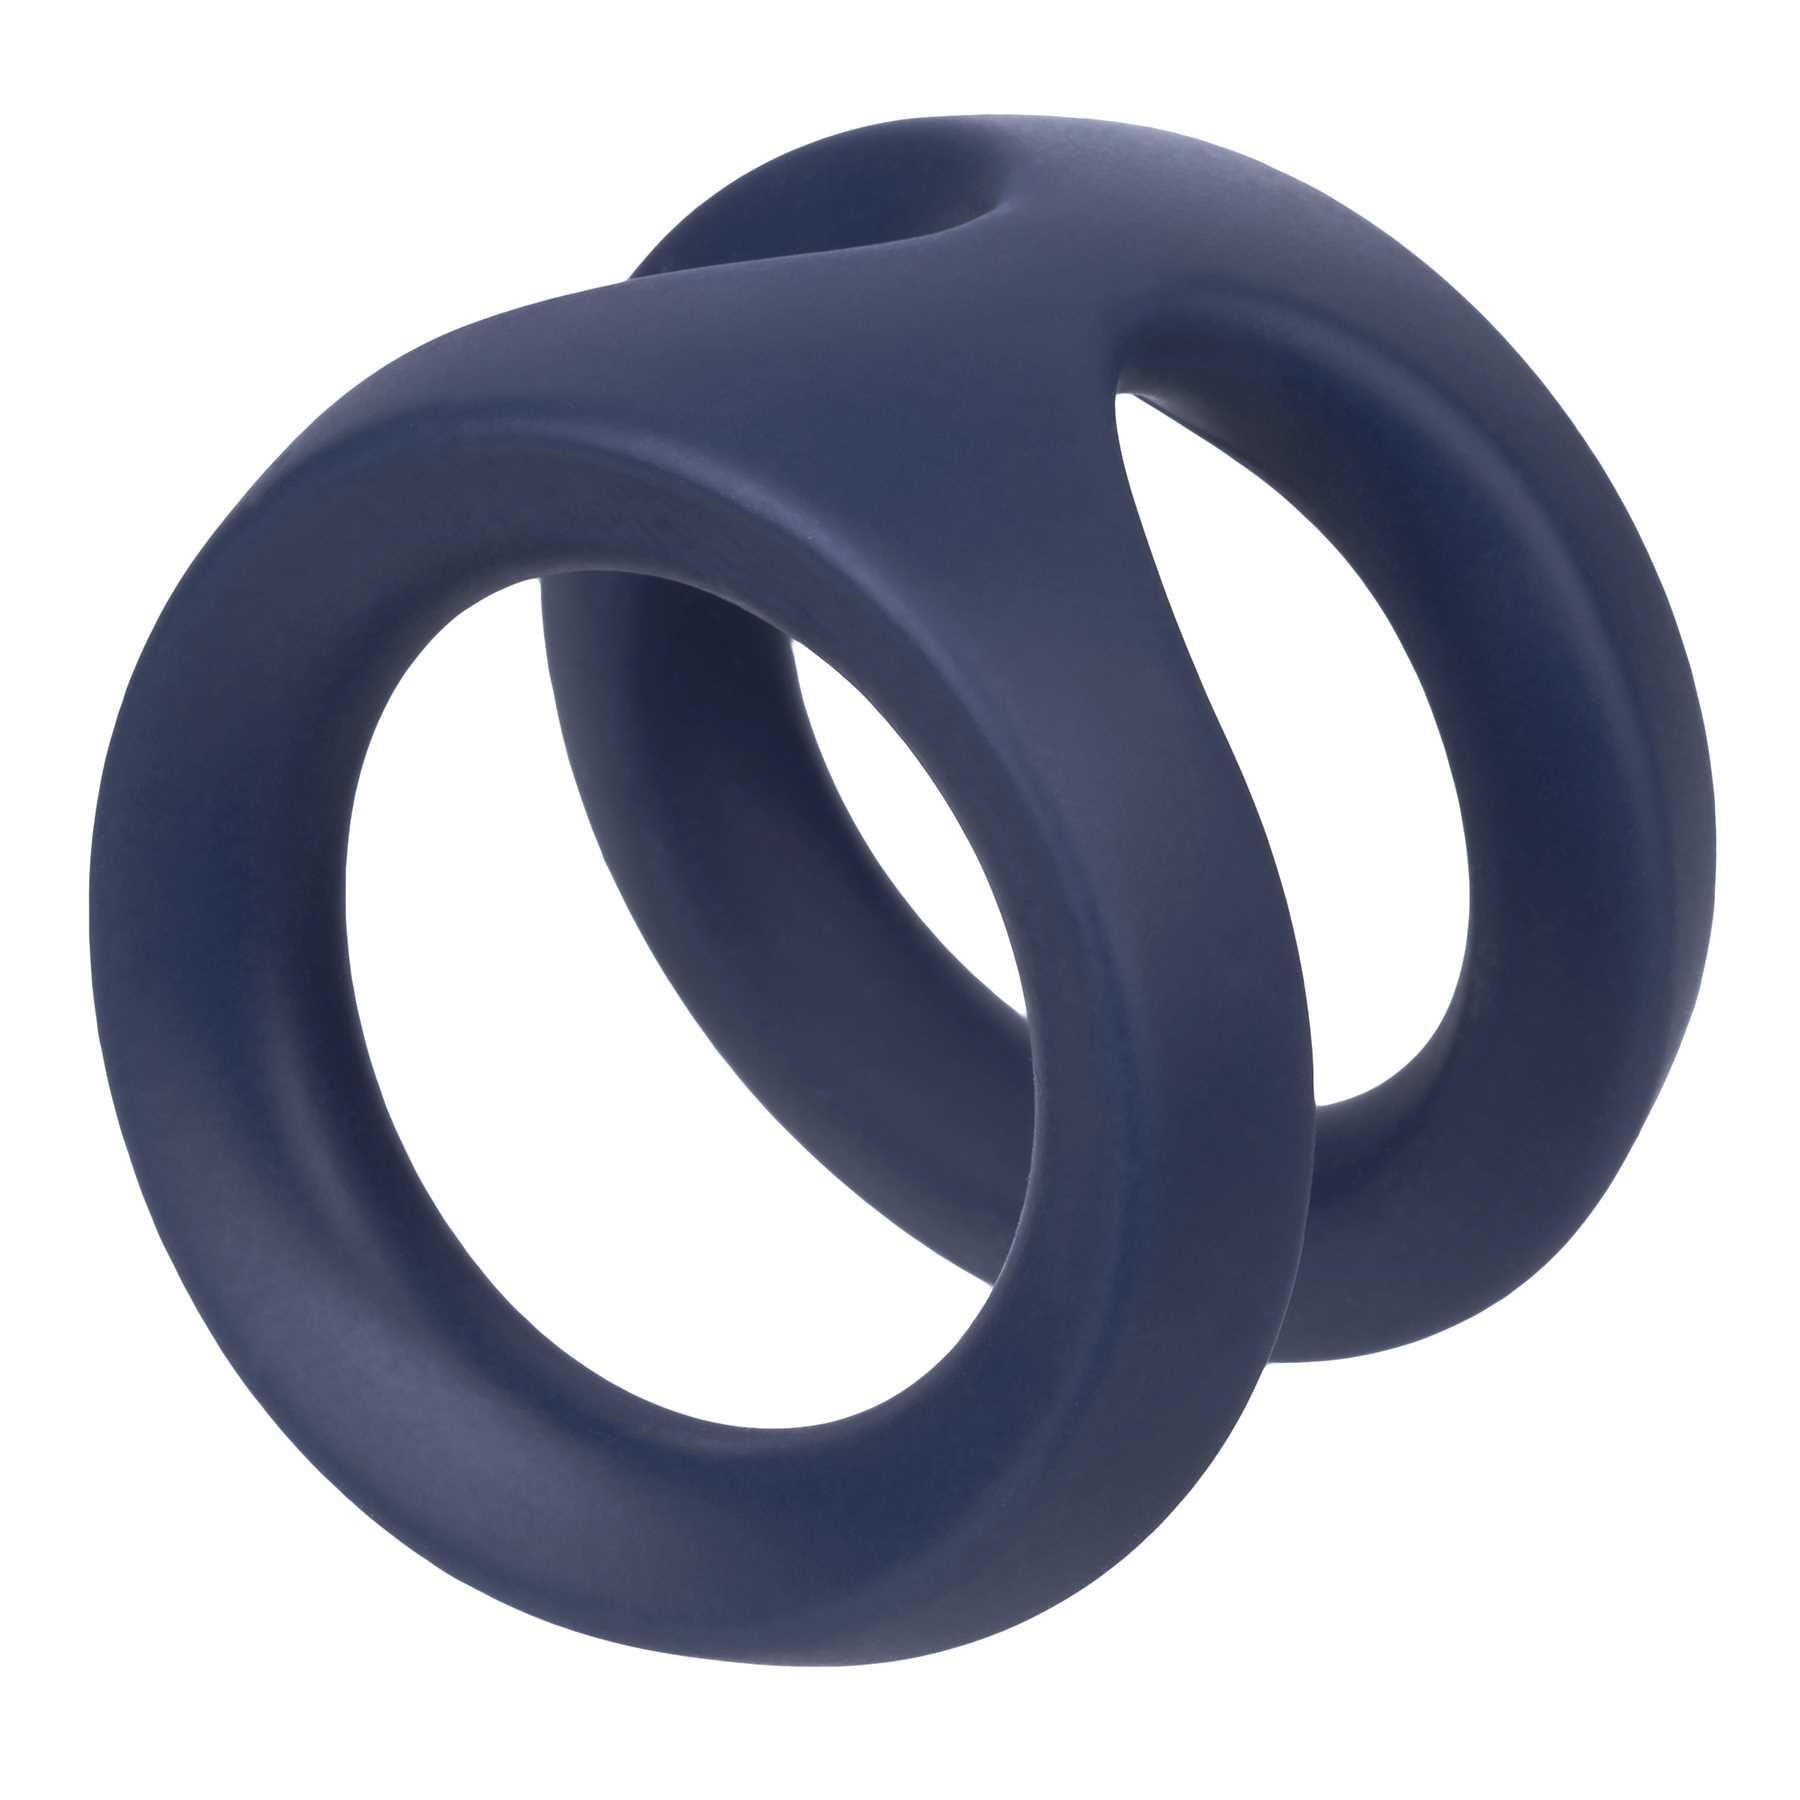 Viceroy Dual Ring product image 3